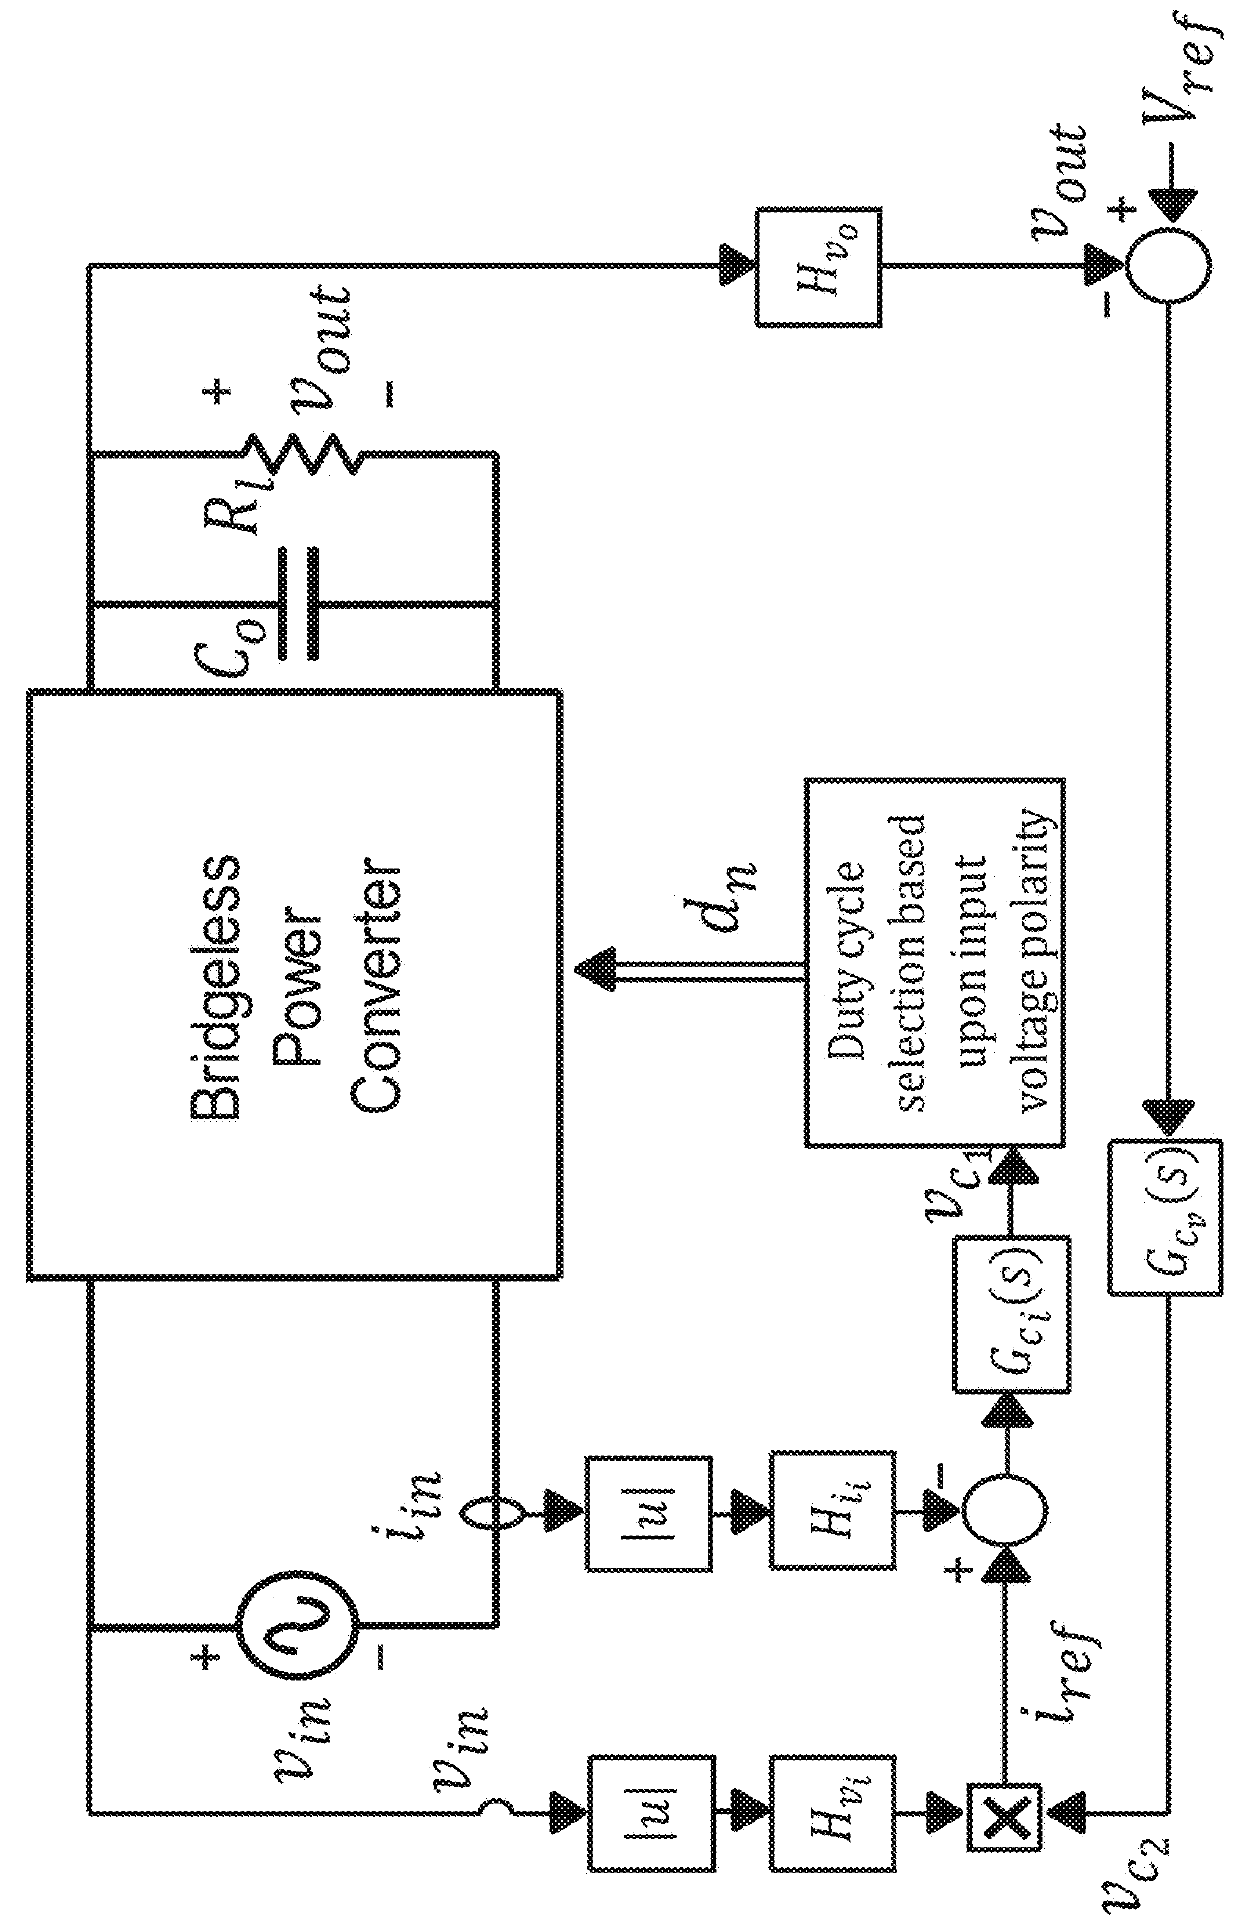 Control architecture for ac-dc and dc-ac conversion capable of bidirectional active and reactive power processing